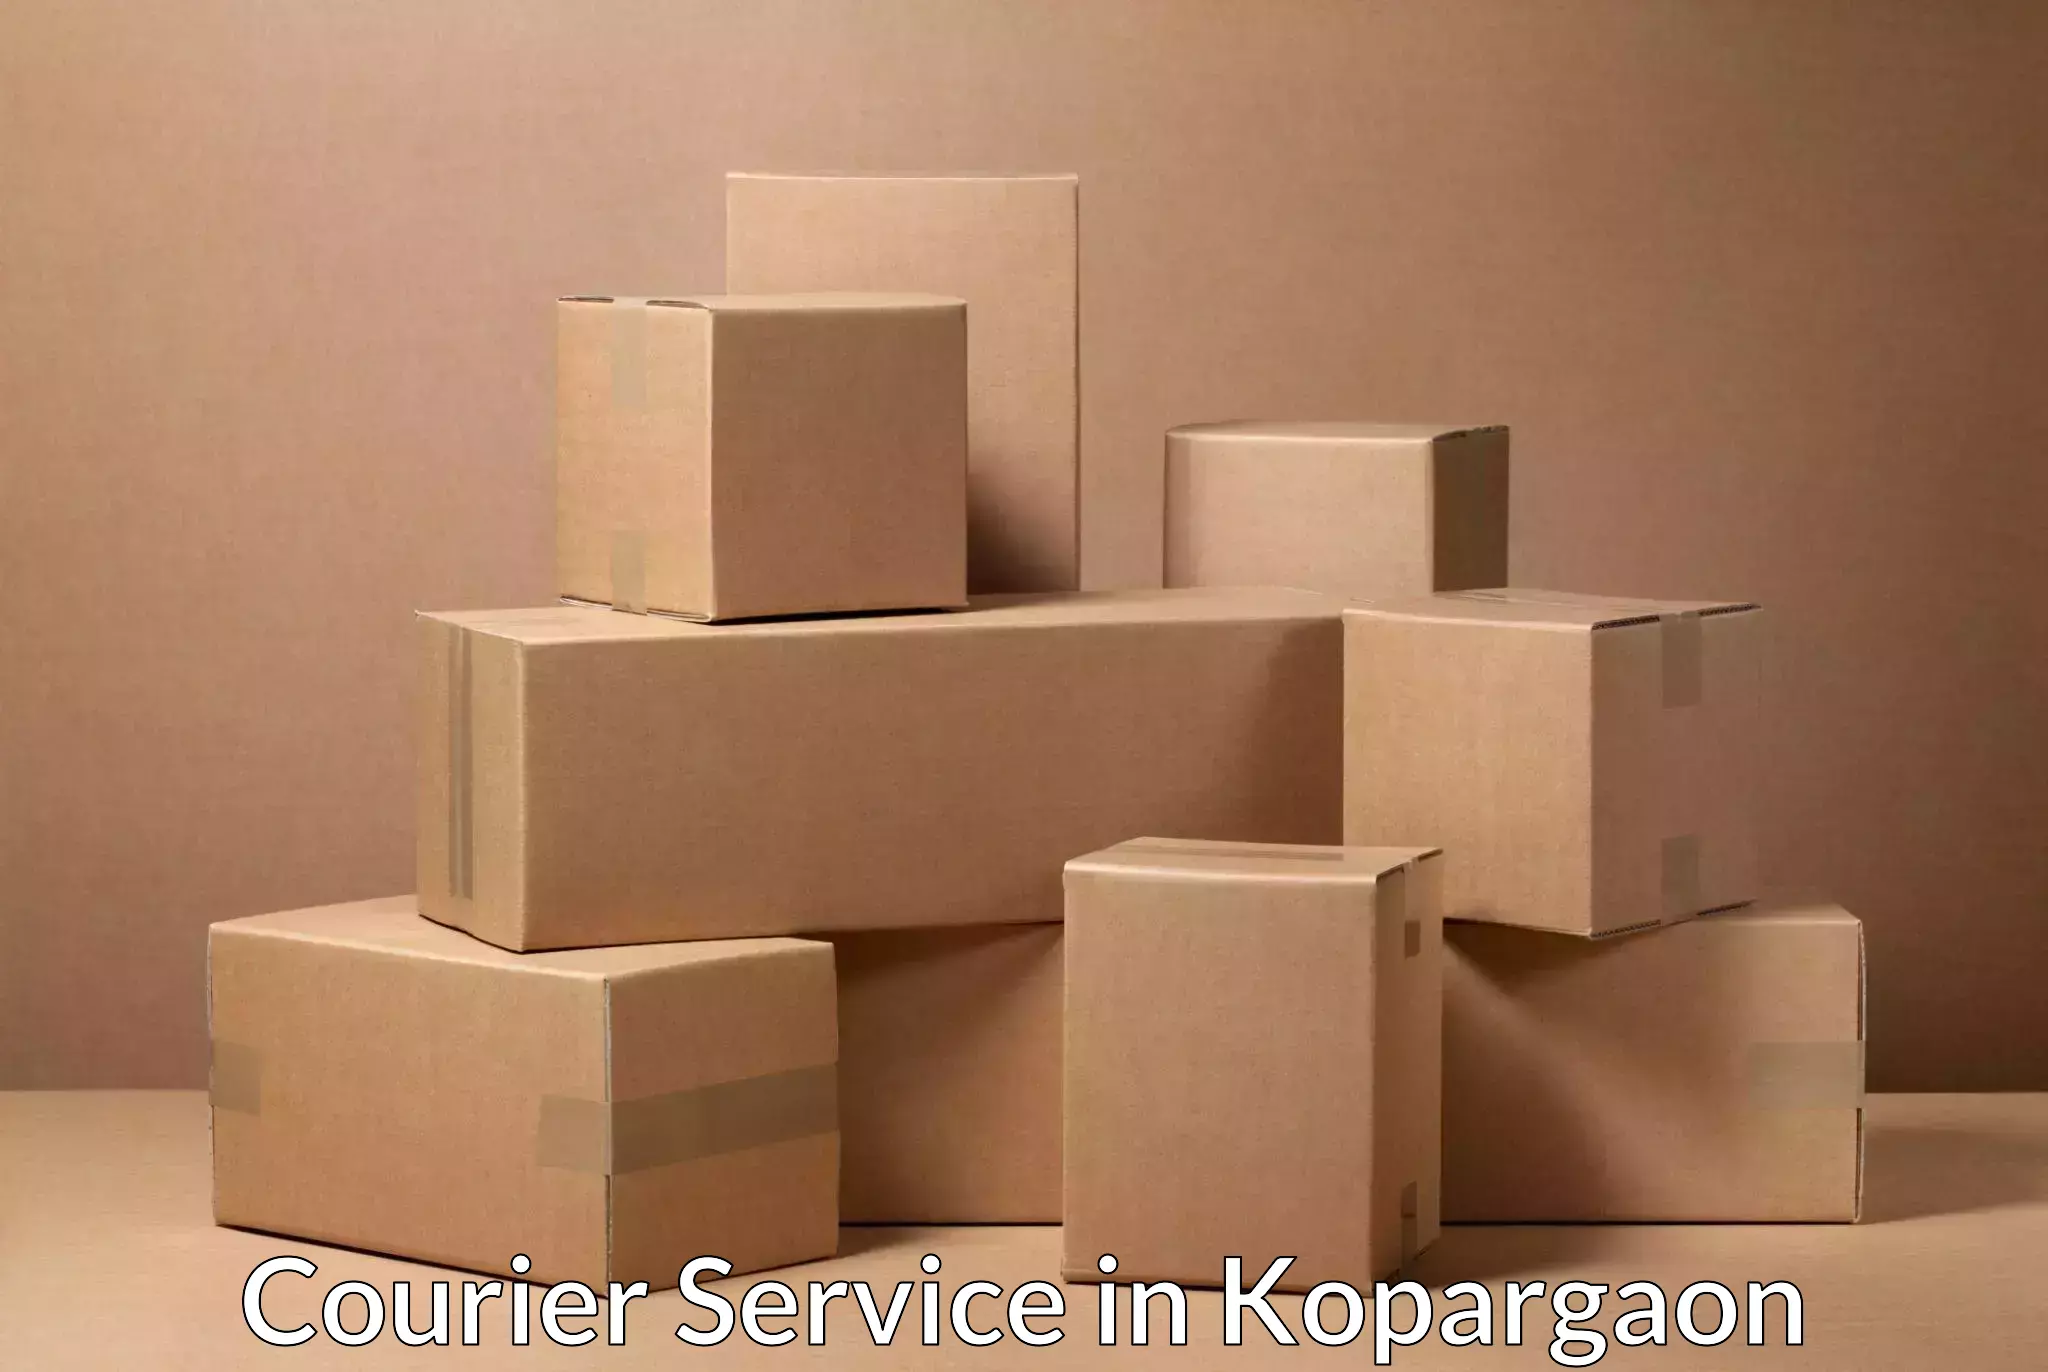 Shipping and handling in Kopargaon